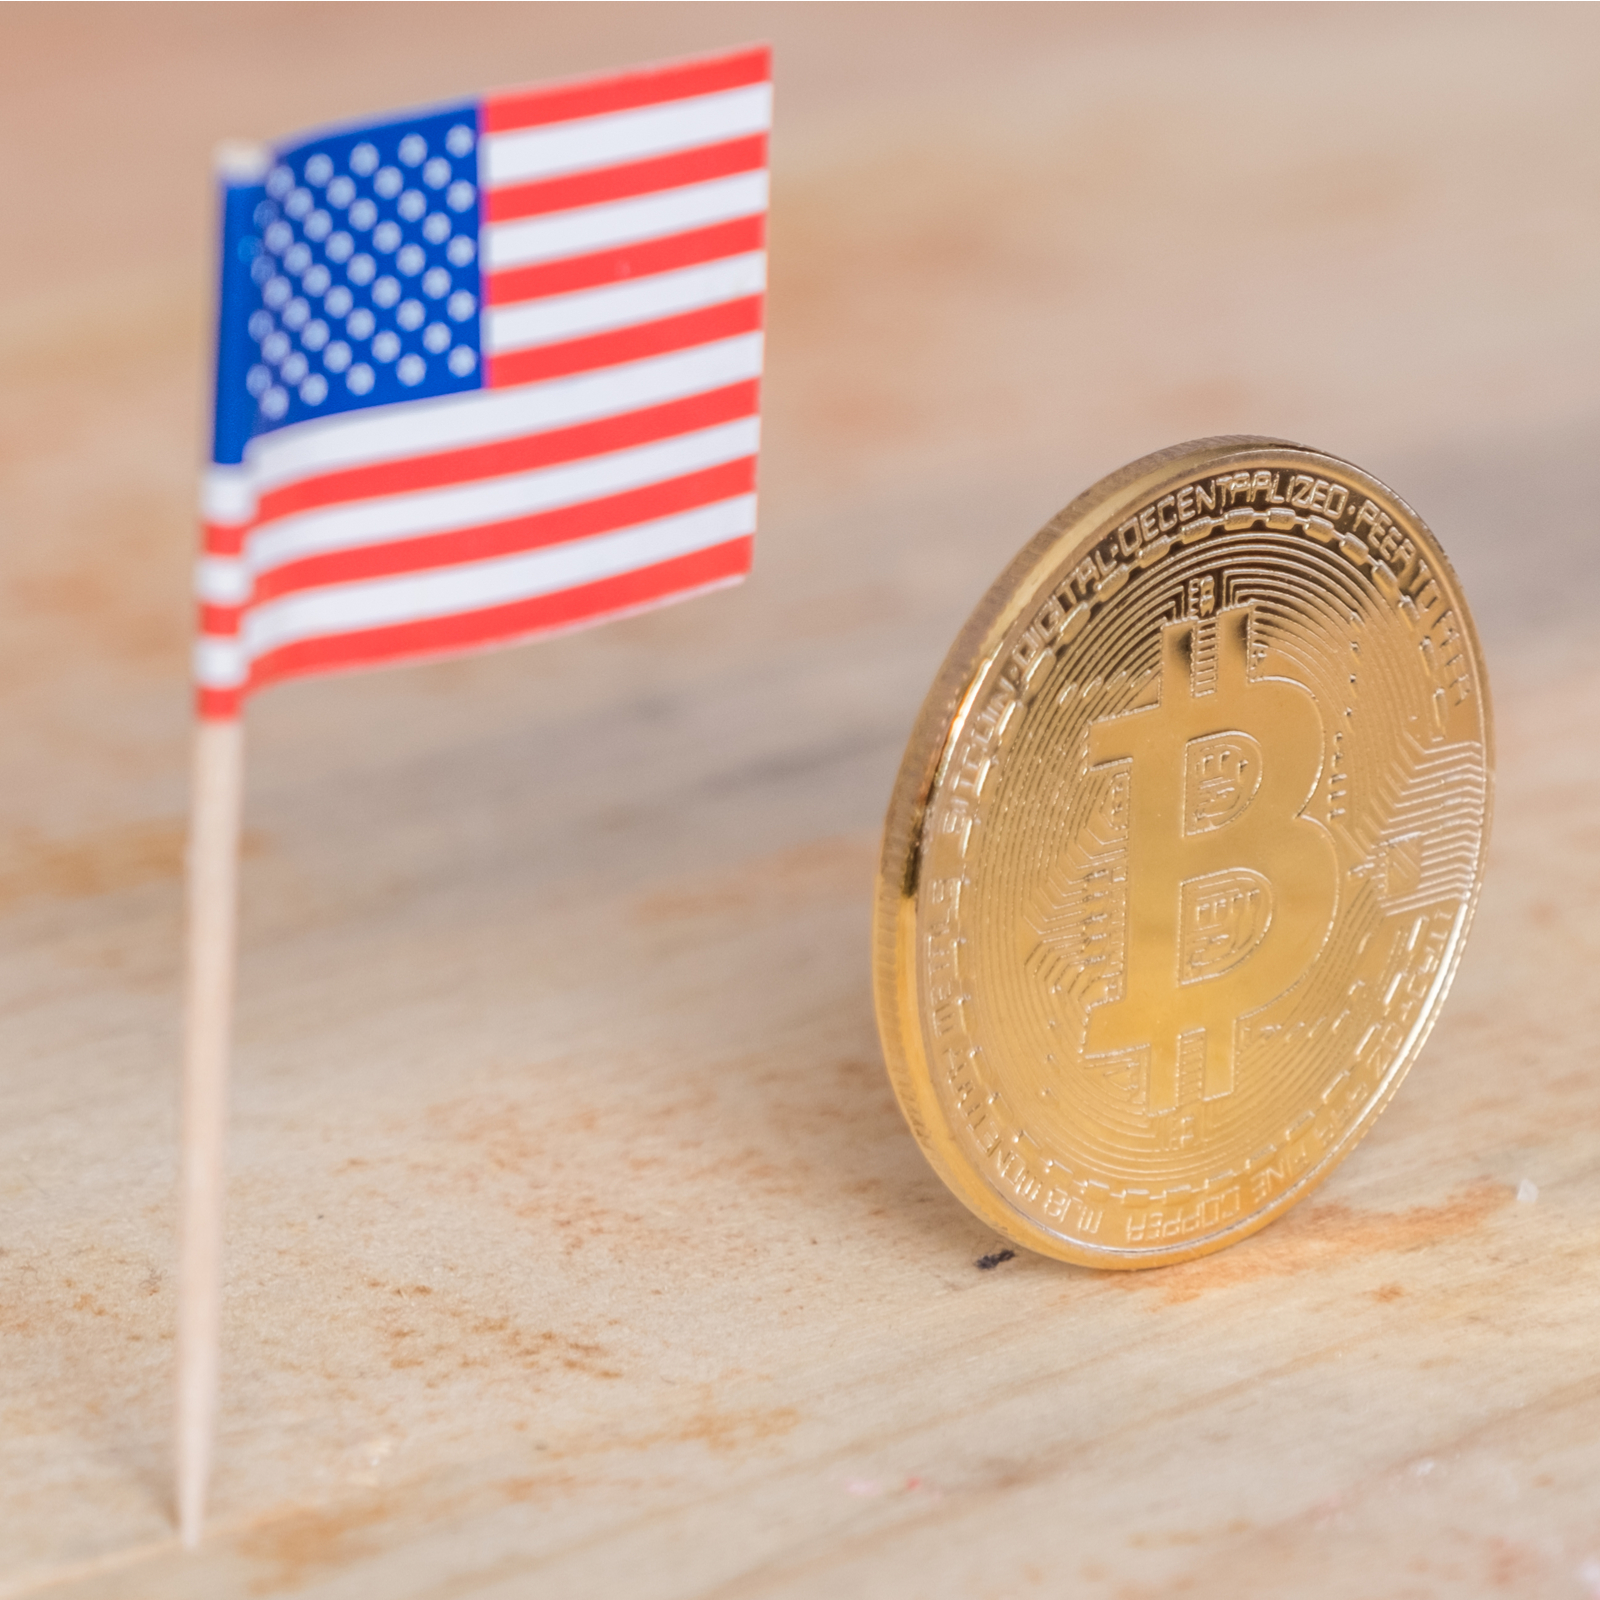 U.S. Regulations Round-Up: CFTC Can’t Keep Pace With Crypto, Libertarian Candidate Accepts Bitcoin Donations